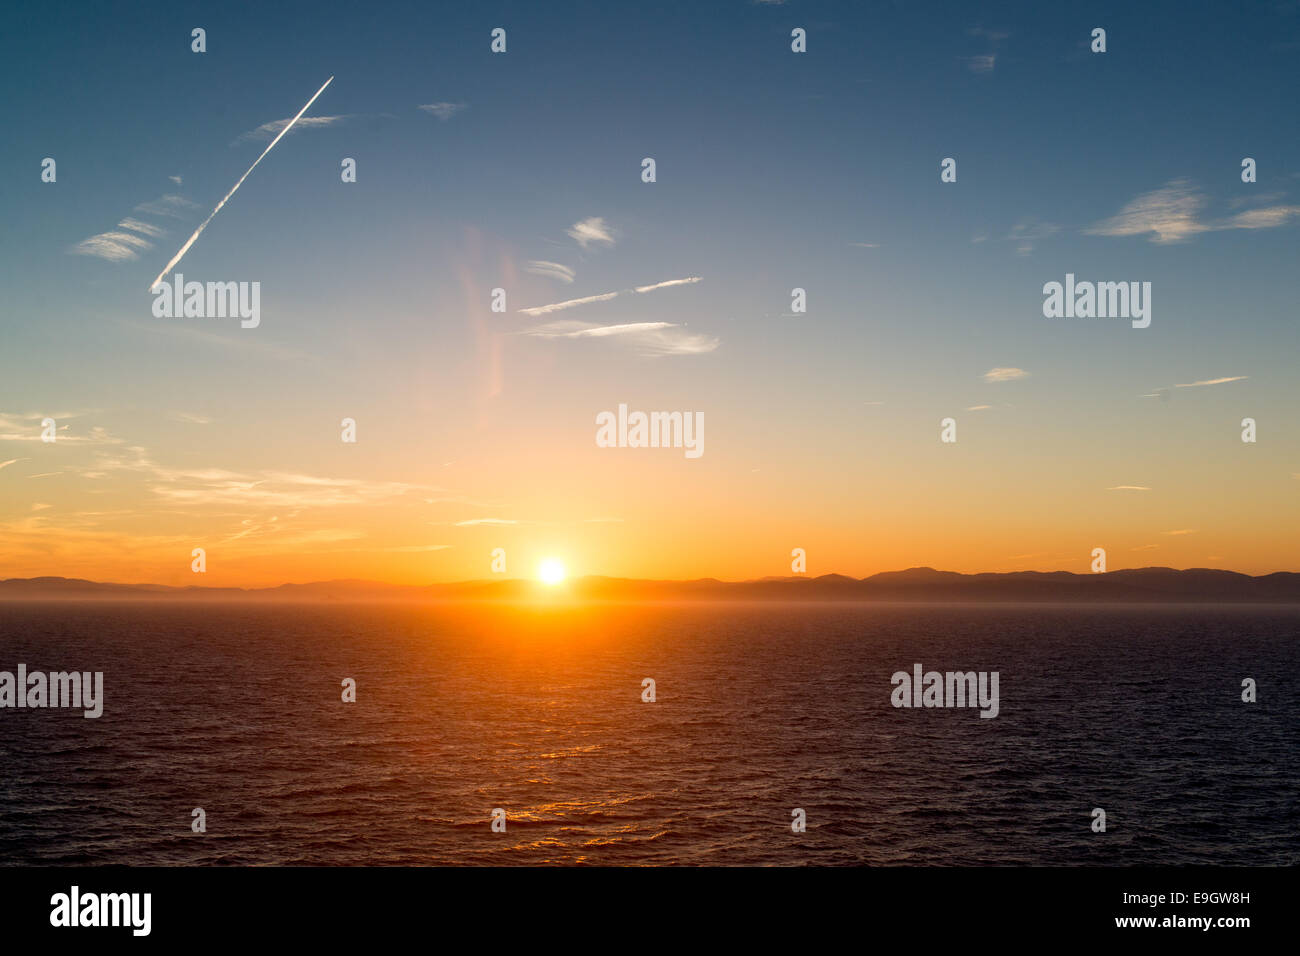 Sunset over the Mediterranean Sea, near Cannes, France Stock Photo